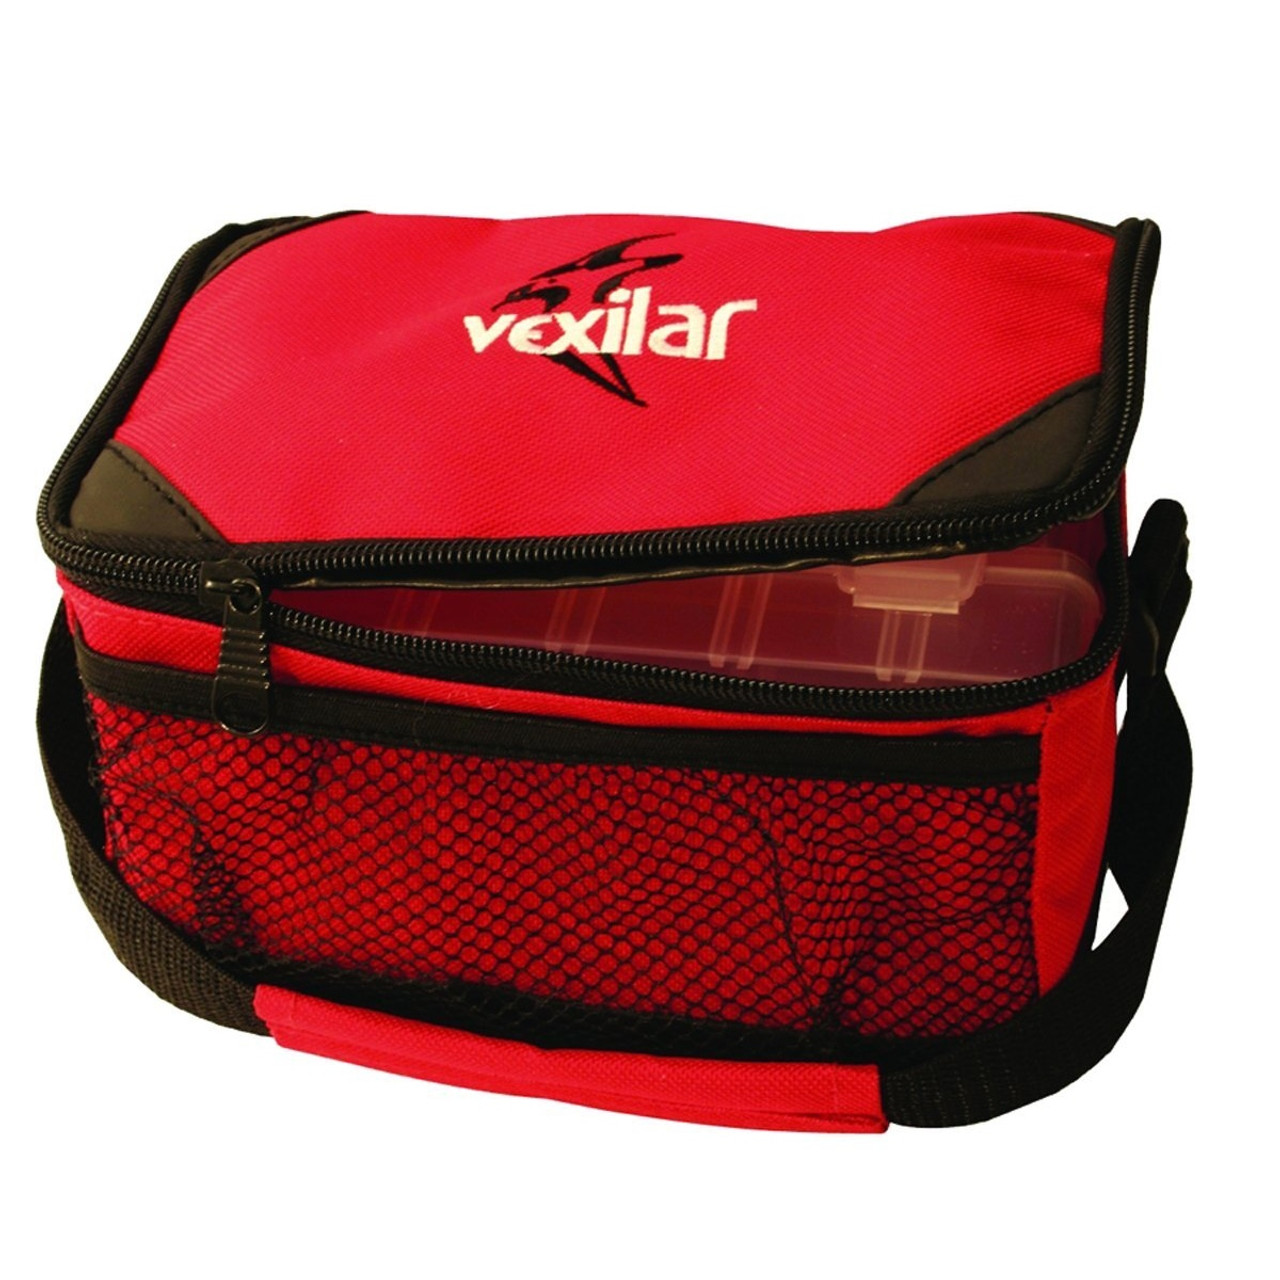 Vexilar Tackle Tote with 3 Boxes (TT-100)